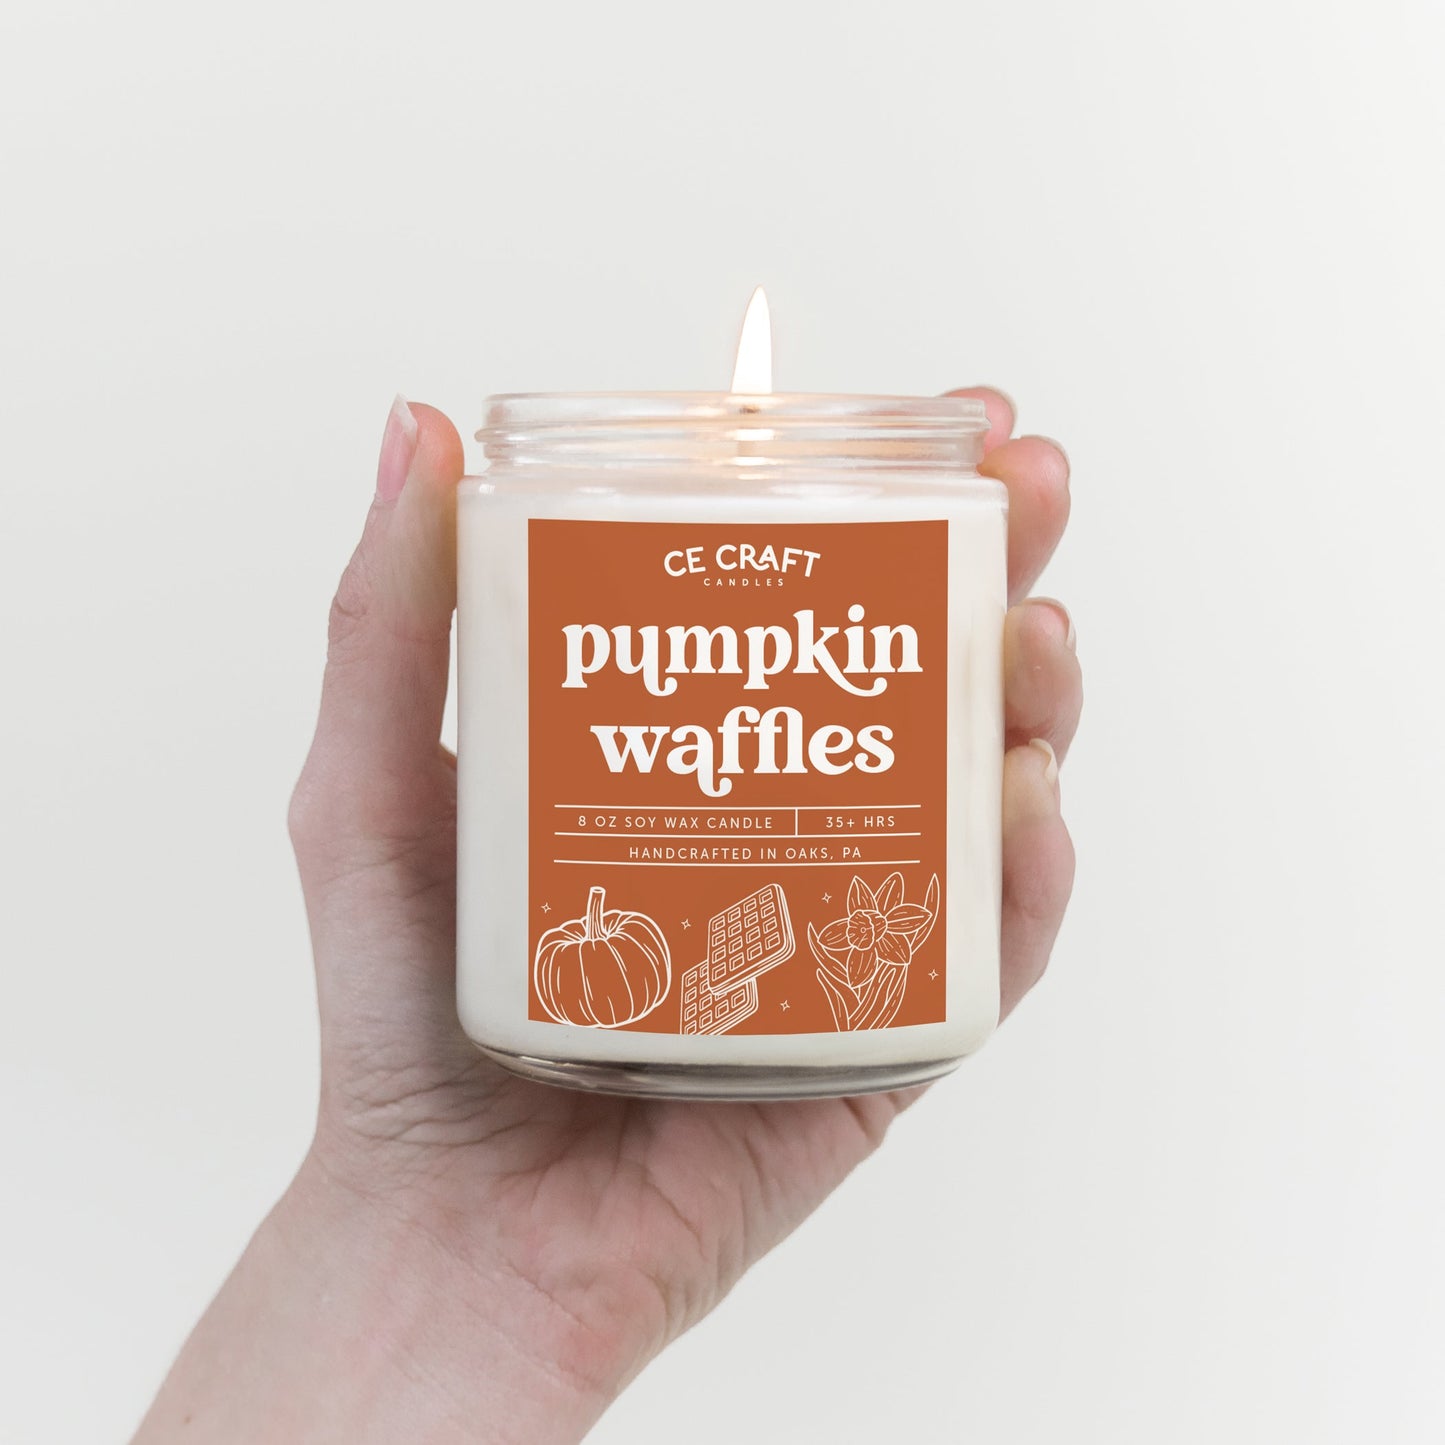 Pumpkin Waffles Scented Candle Candles CE Craft 